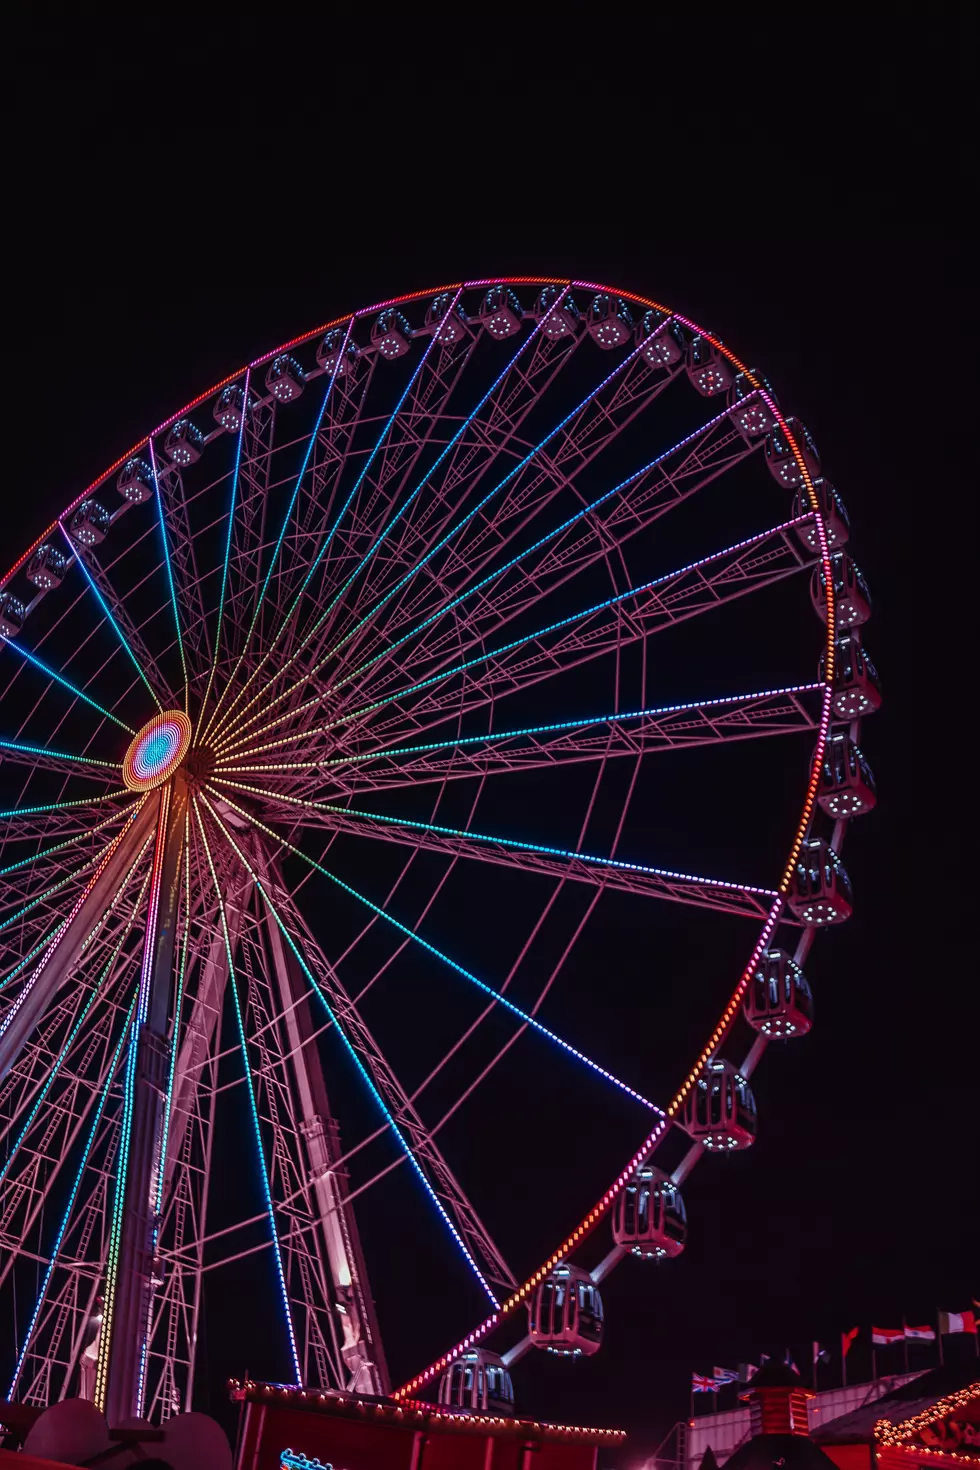 Couple Arrested for Having Sex on Cedar Point&#8217;s Giant Wheel Ride